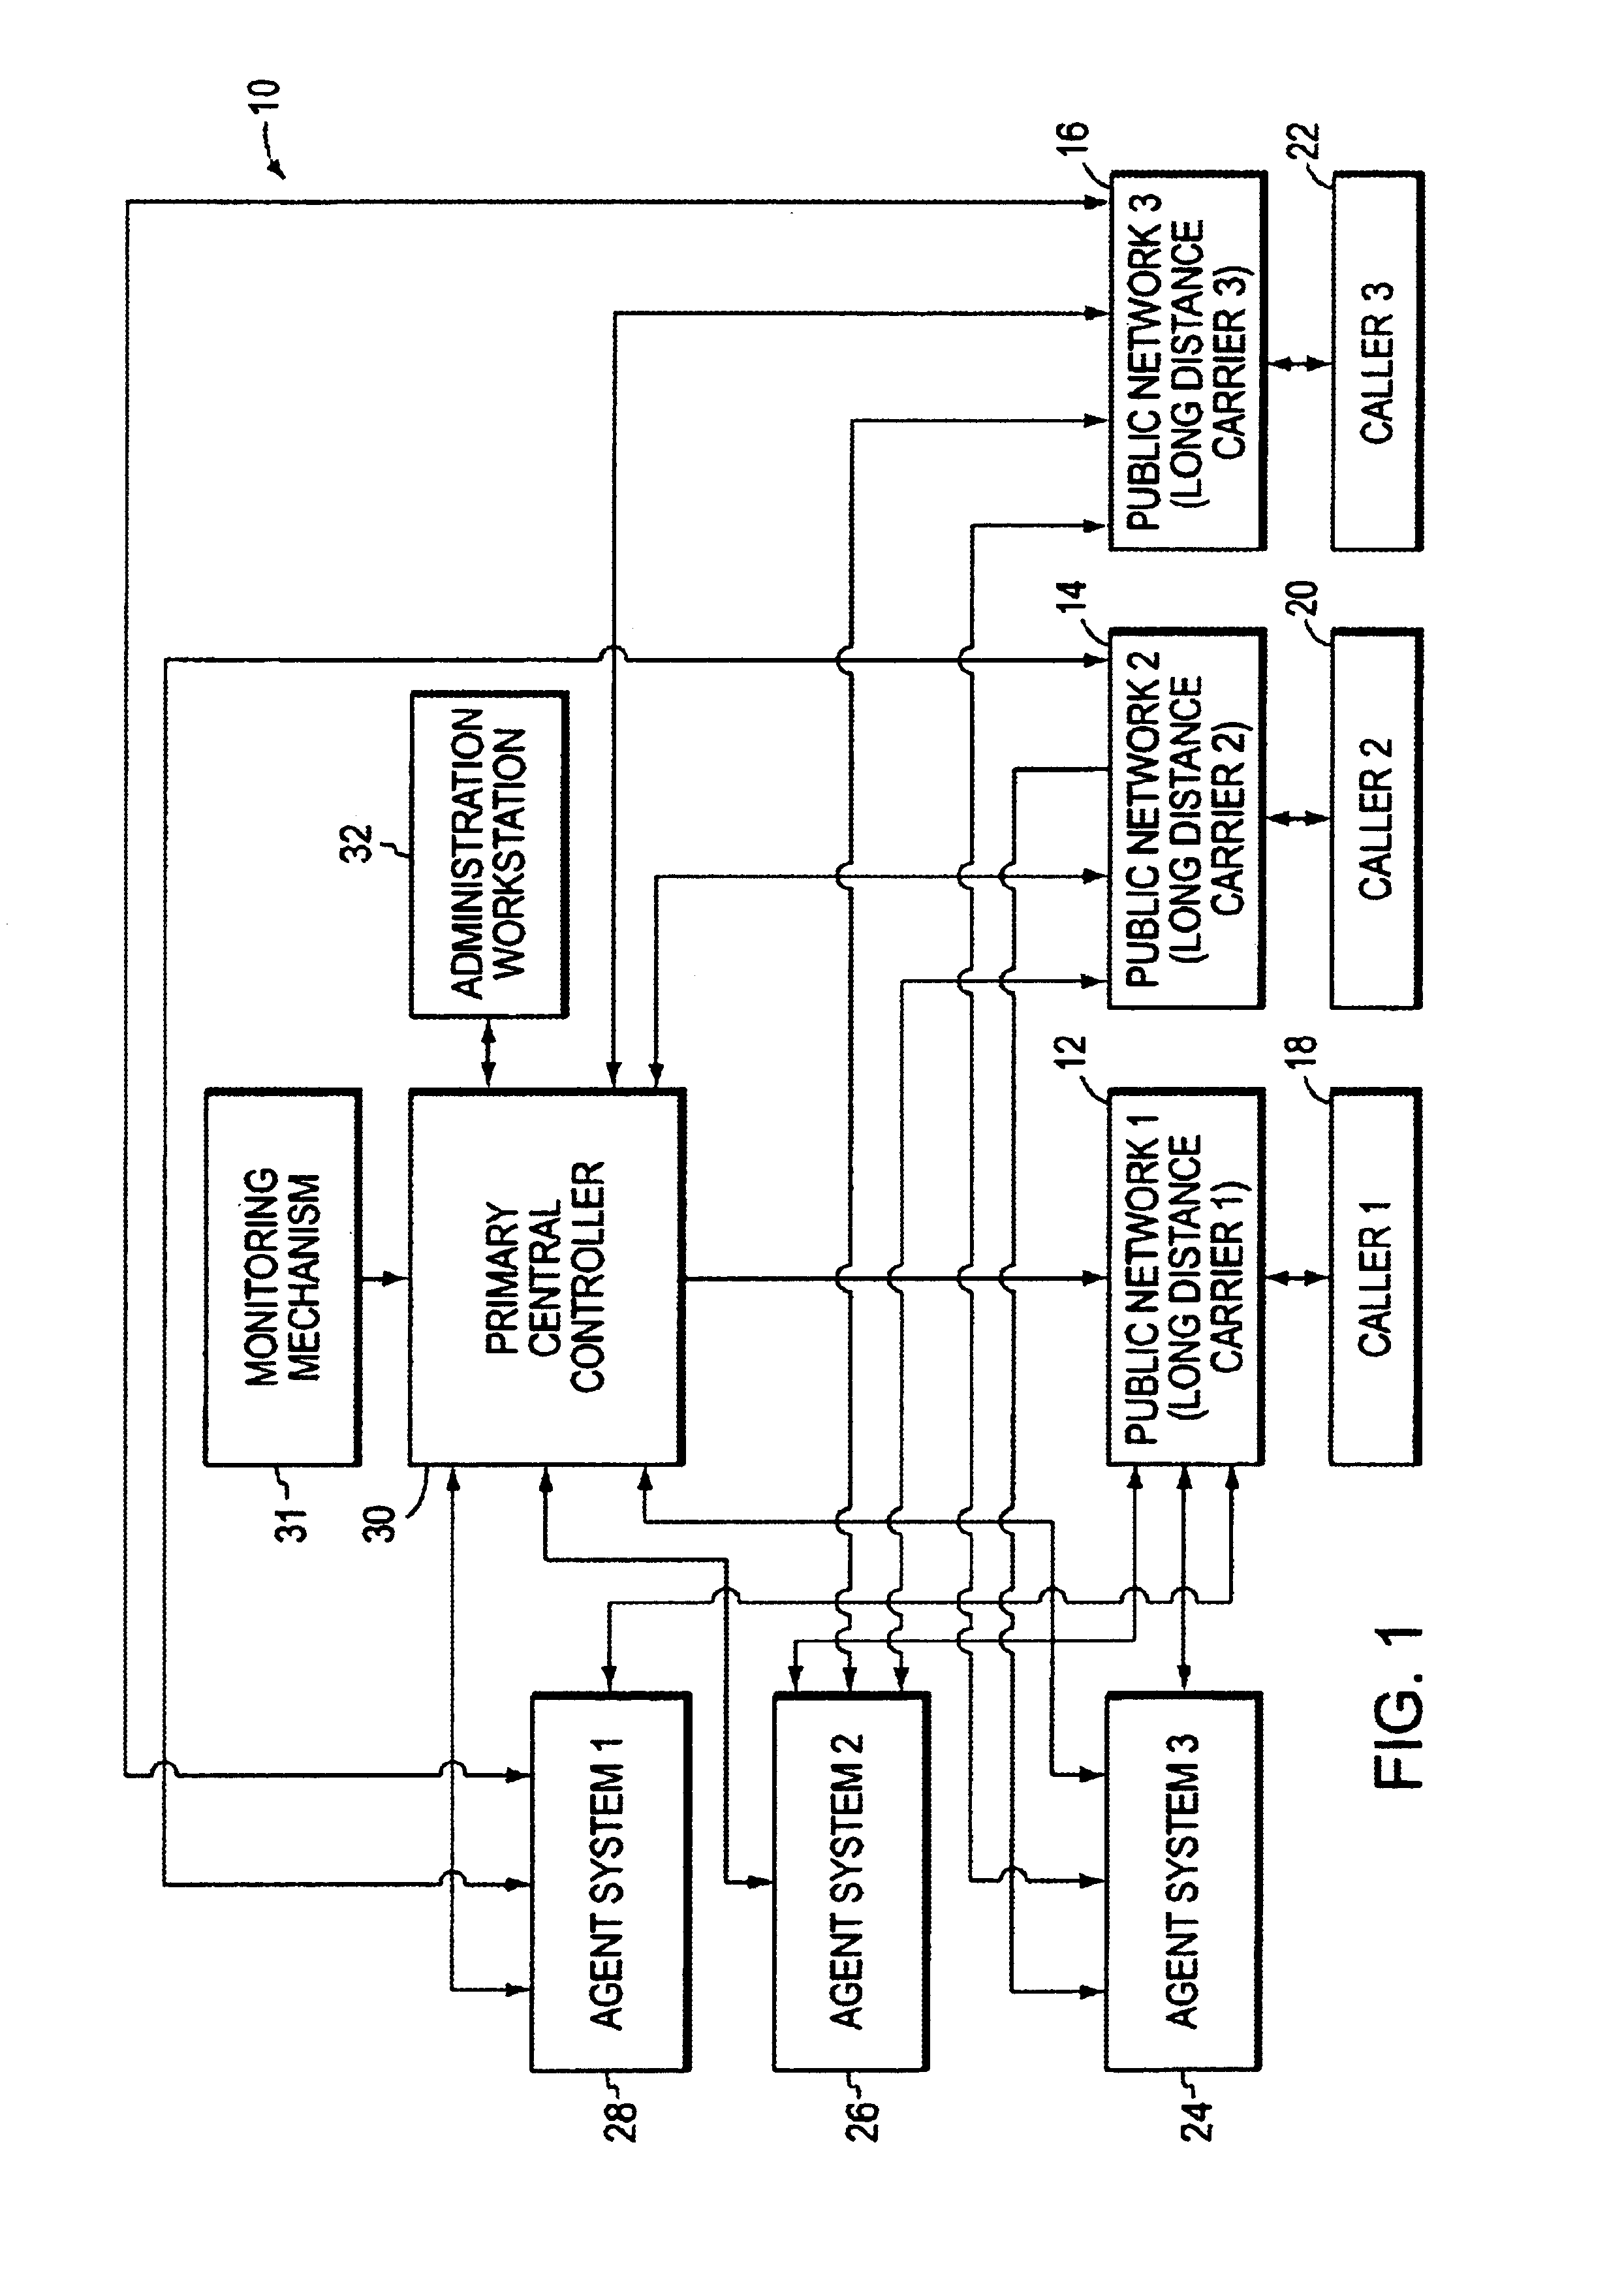 Generation of communication system control scripts